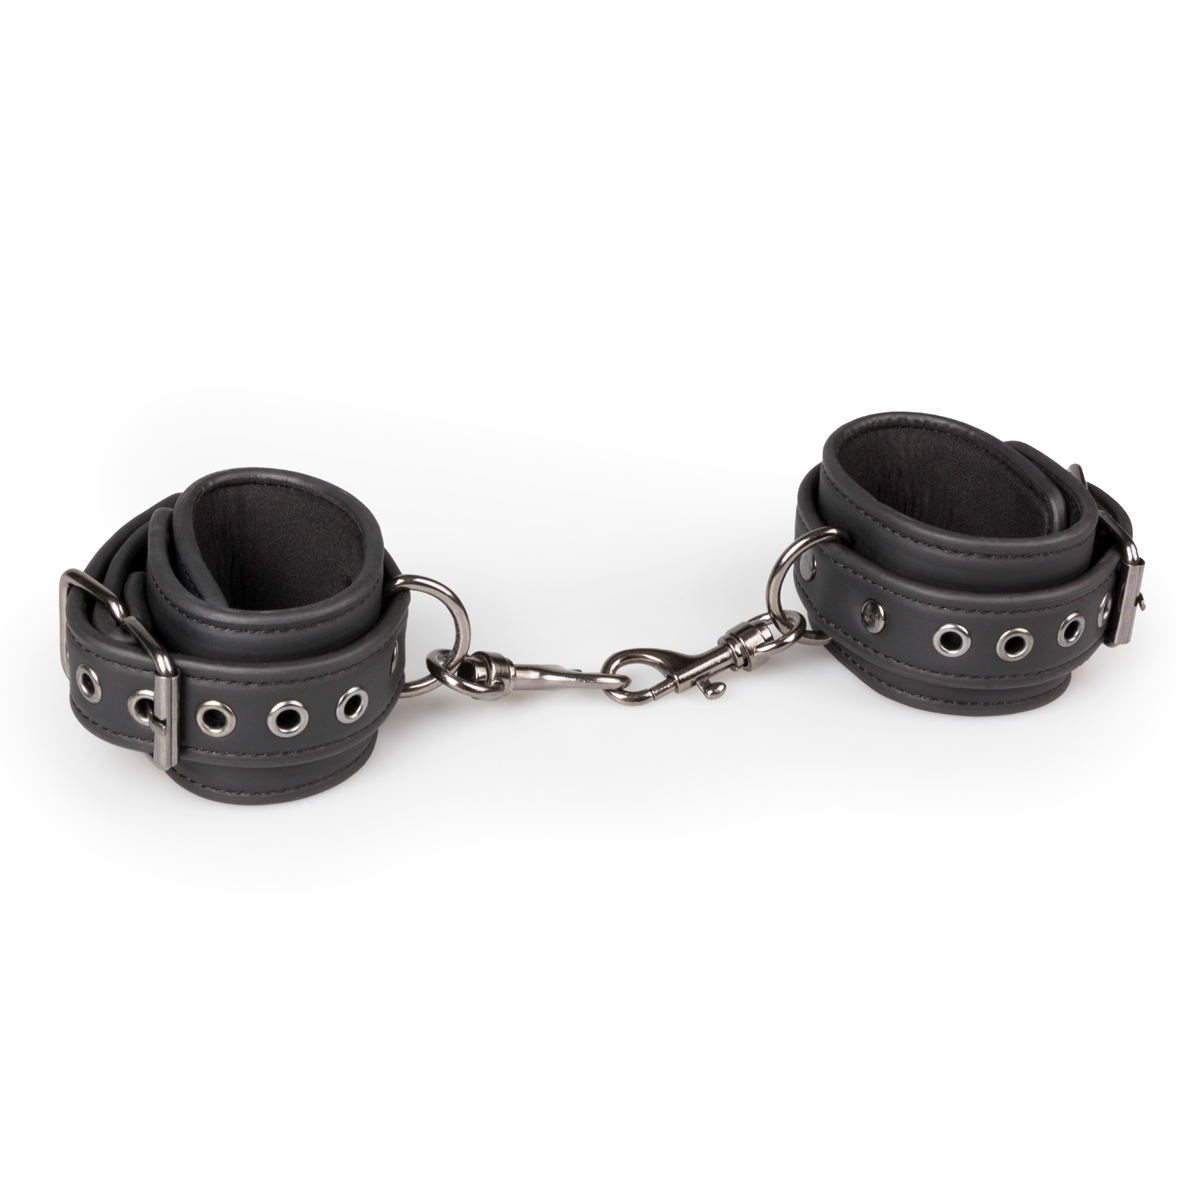 Easytoys Ankle Cuffs